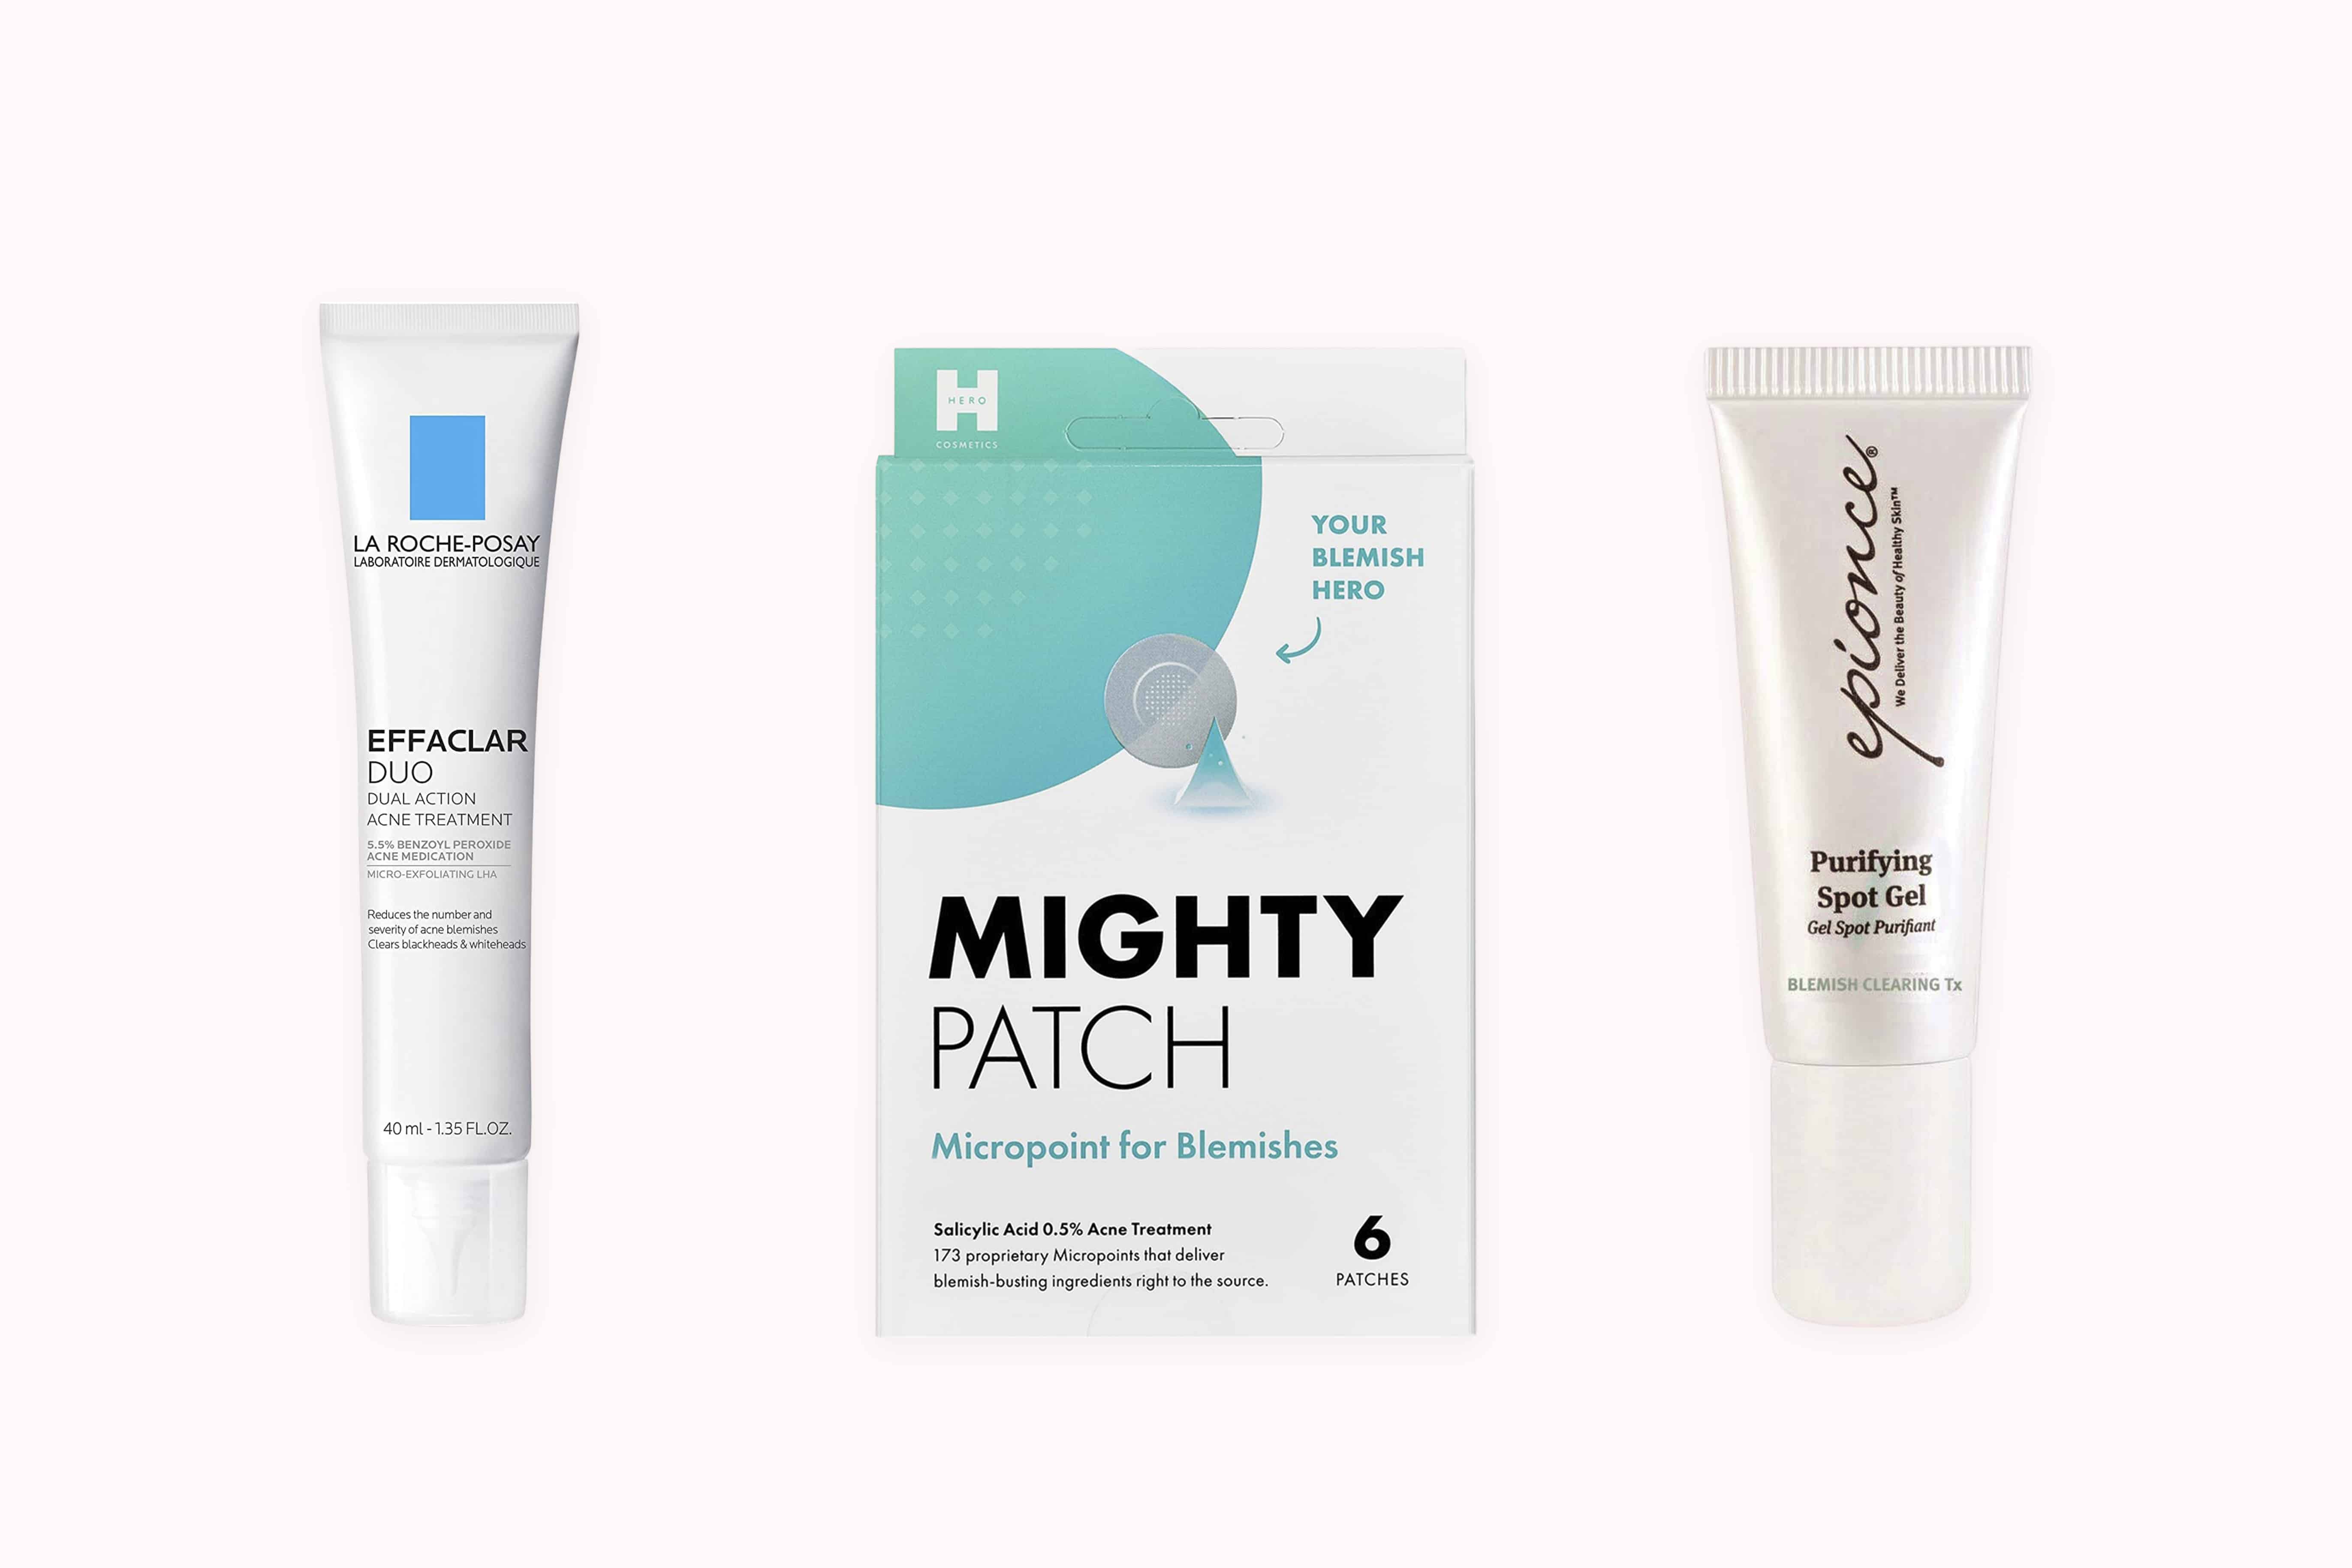 Sulfur, salicylic acid, and benzoyl peroxide are all effective ingredients for acne spot treatment. Here are the best products in each category.